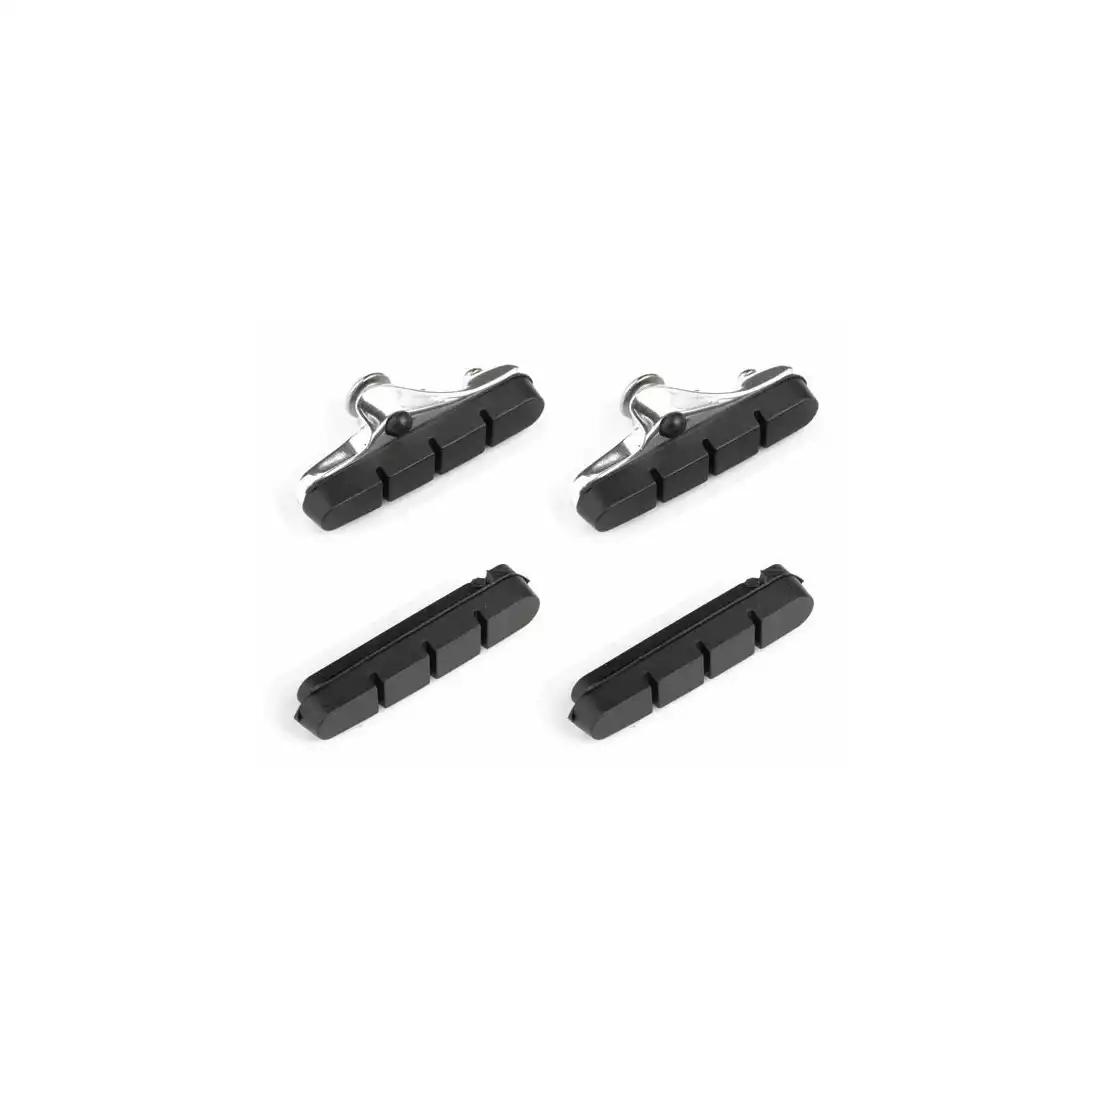 CLARKS CPS240 Brake pads for brakes Shimano / Campagnolo, with brake linings + 2x extra brake linings